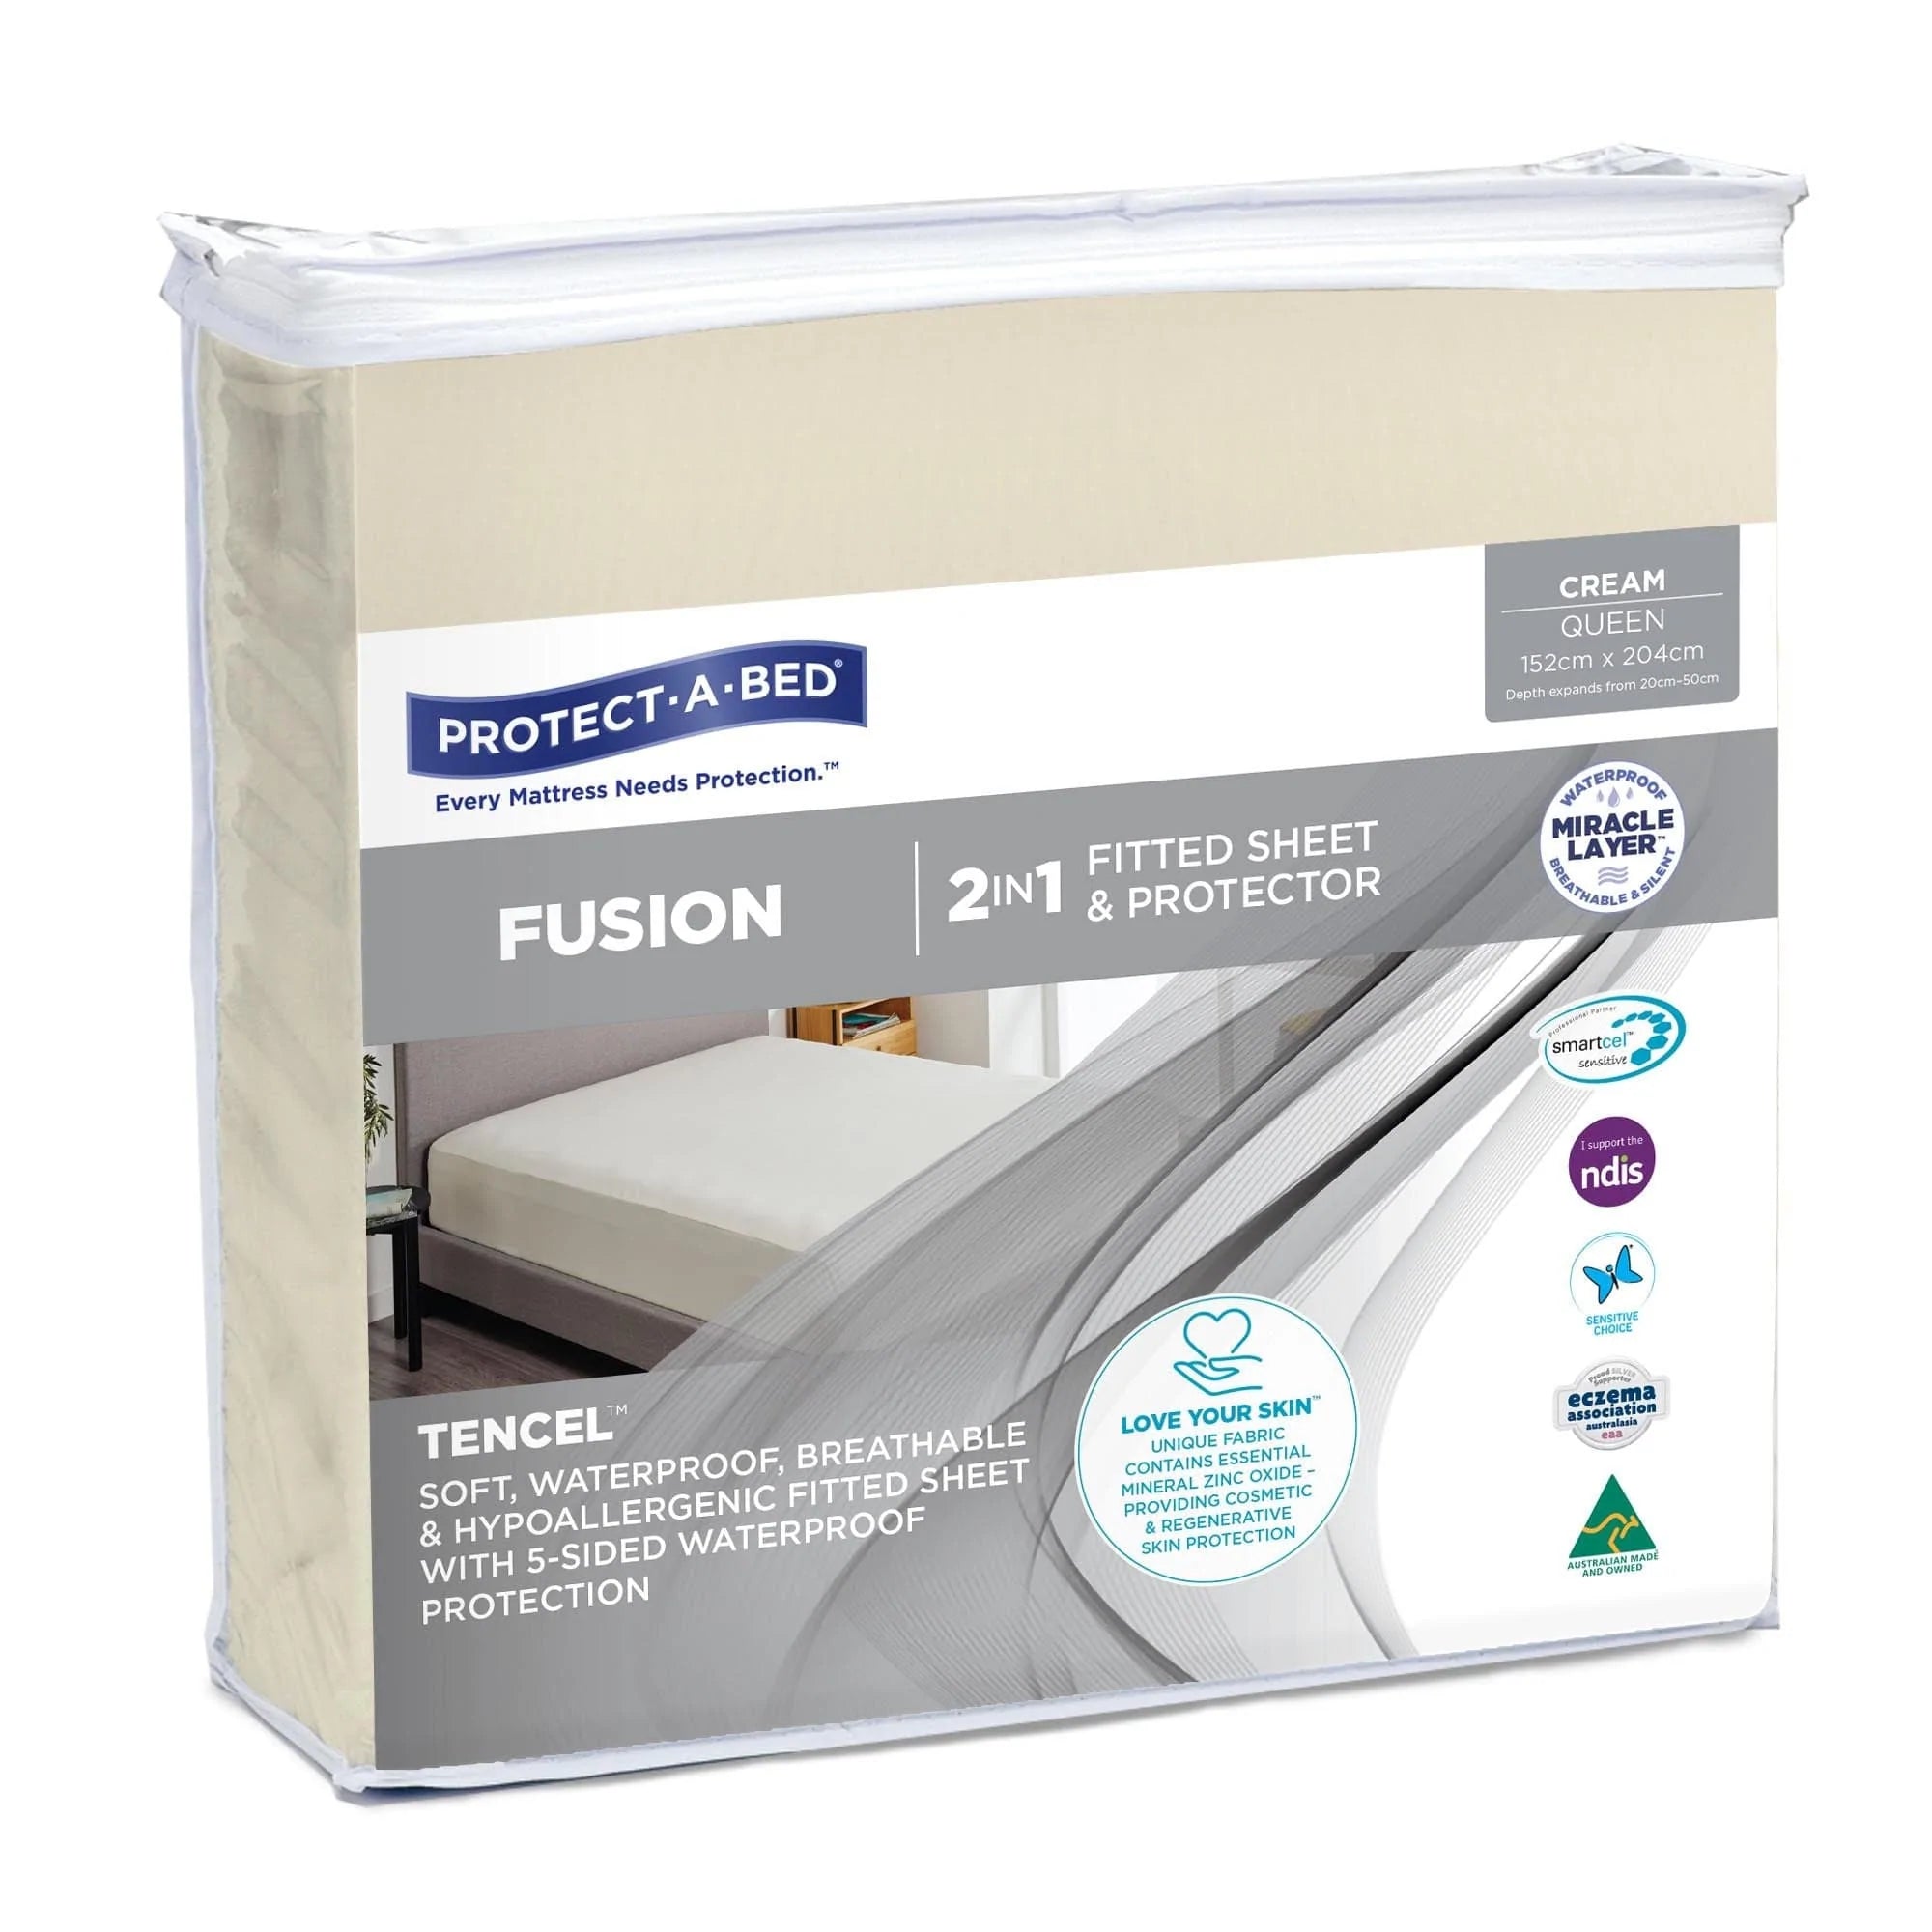 Protect A Bed Queen / Cream Fusion Fitted Sheet SNUF0094QUE0__EA